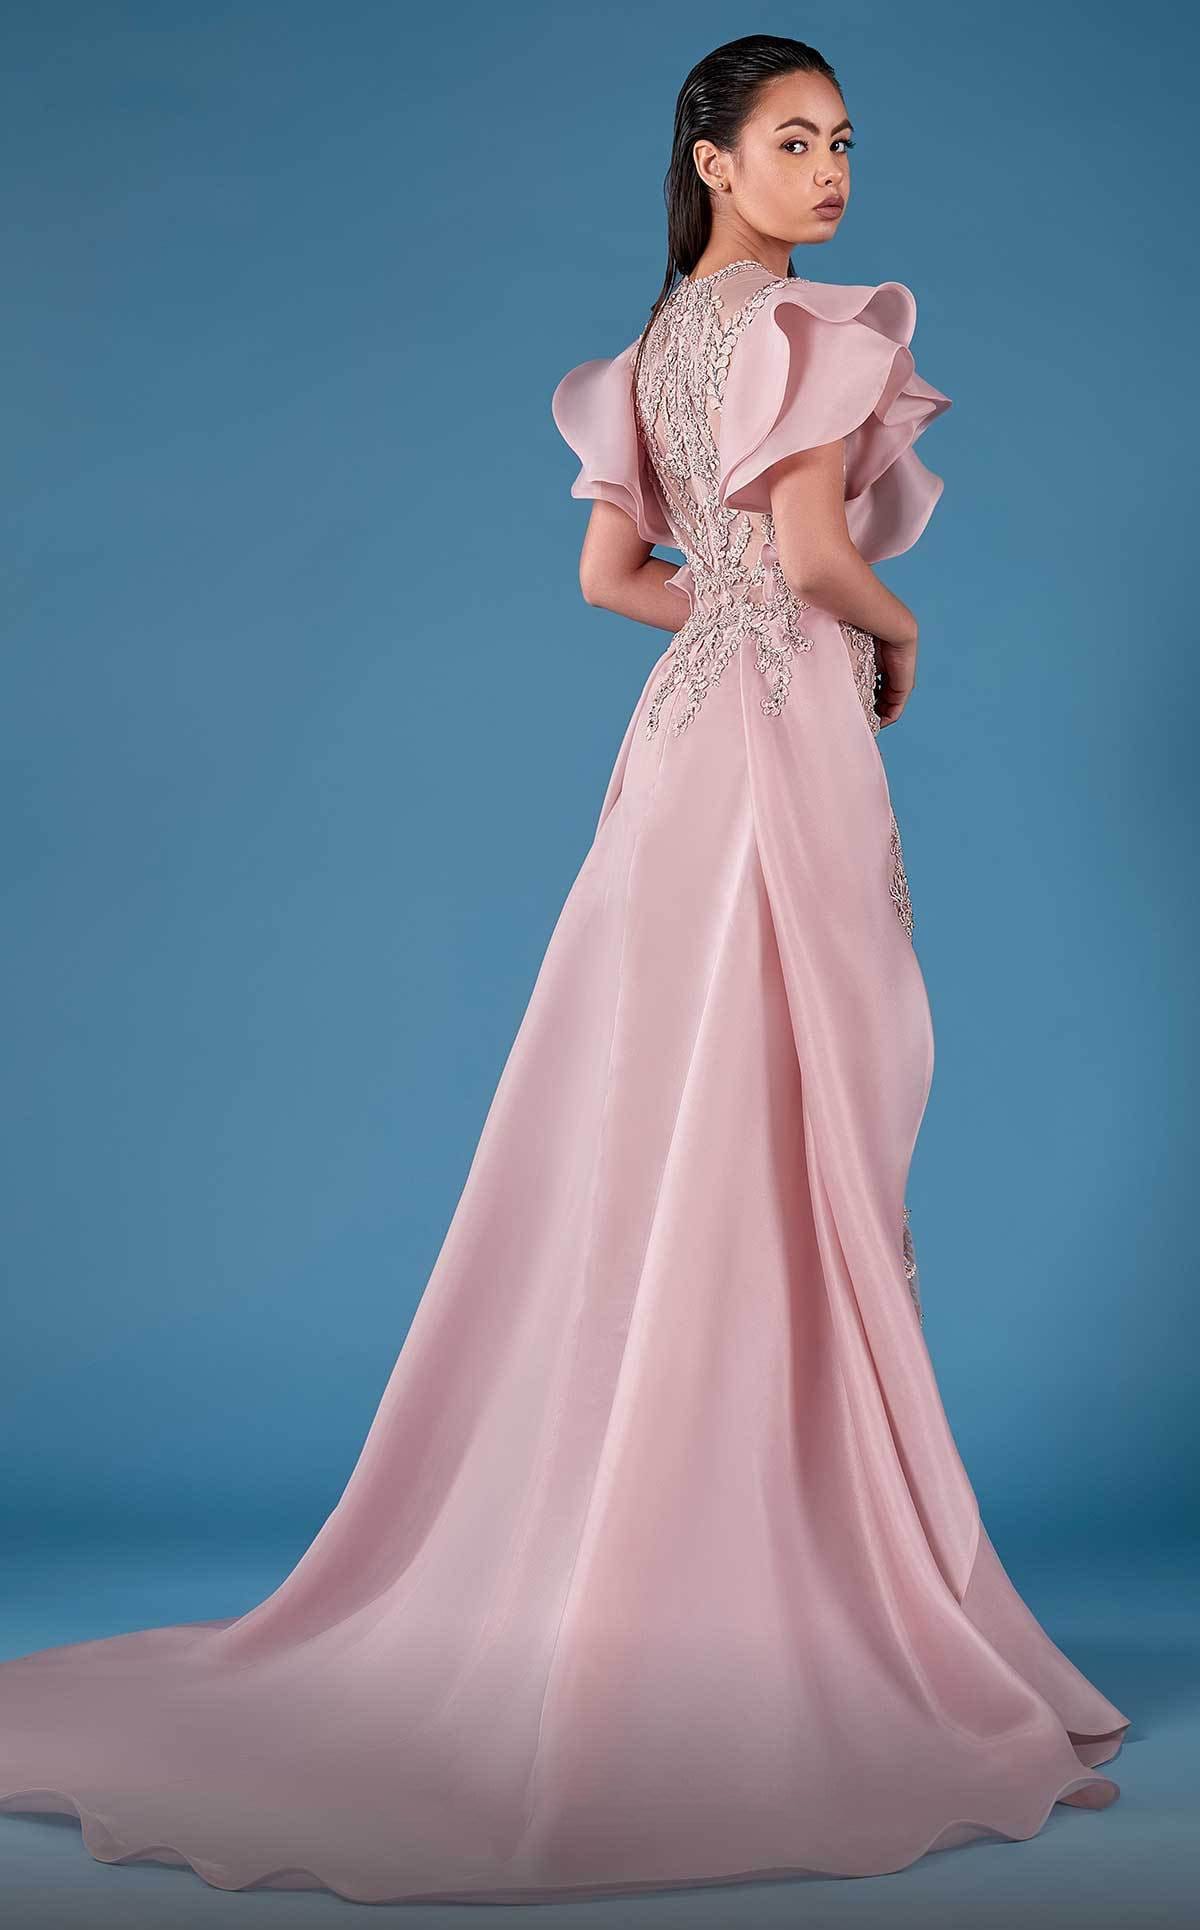 MNM COUTURE - K3754 Embroidered Jewel Neck Sheath Dress In Pink